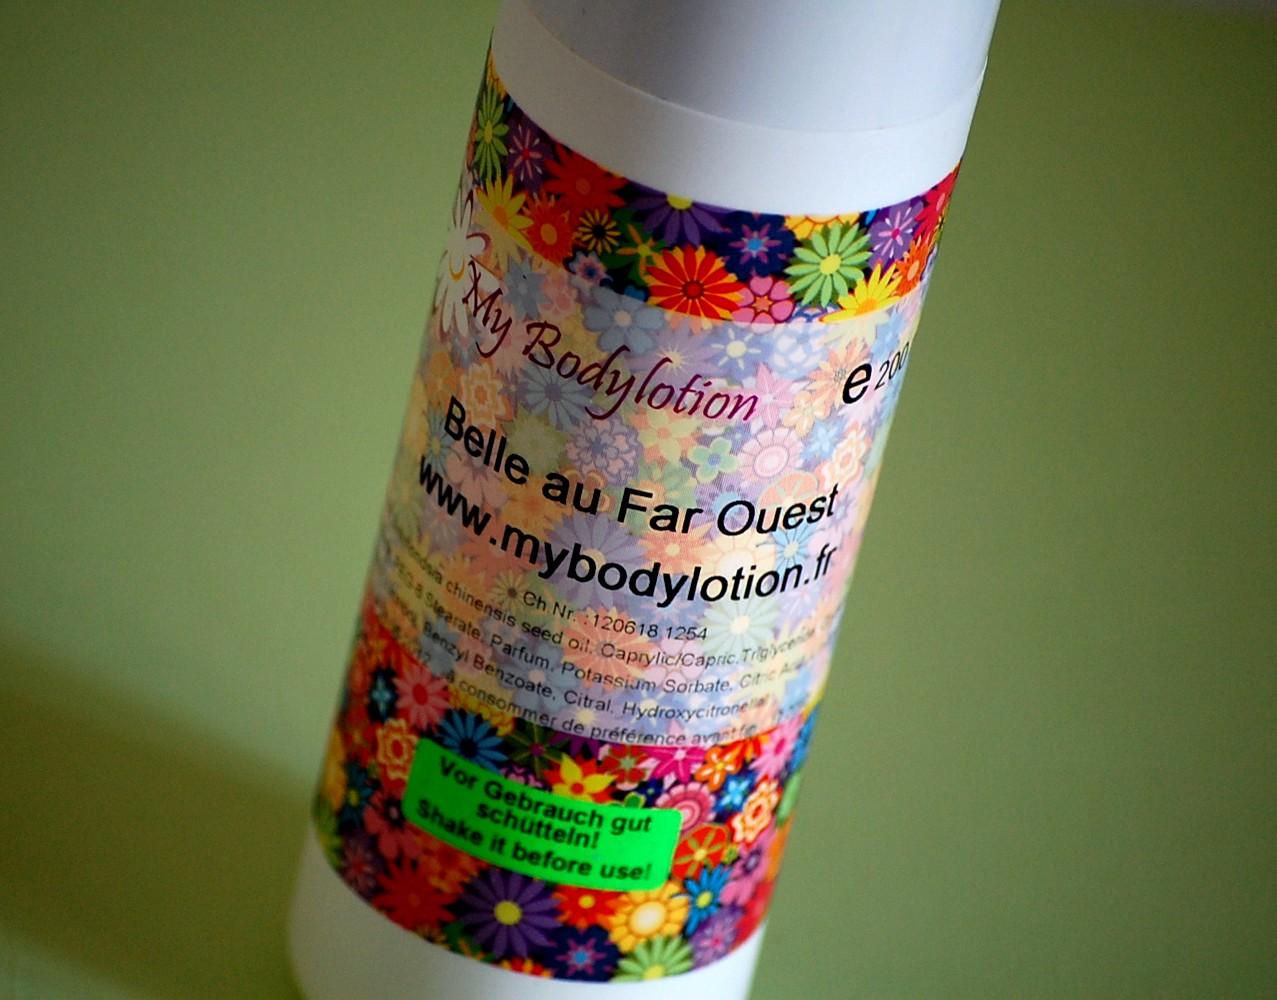 My Bodylotion (concours inside)